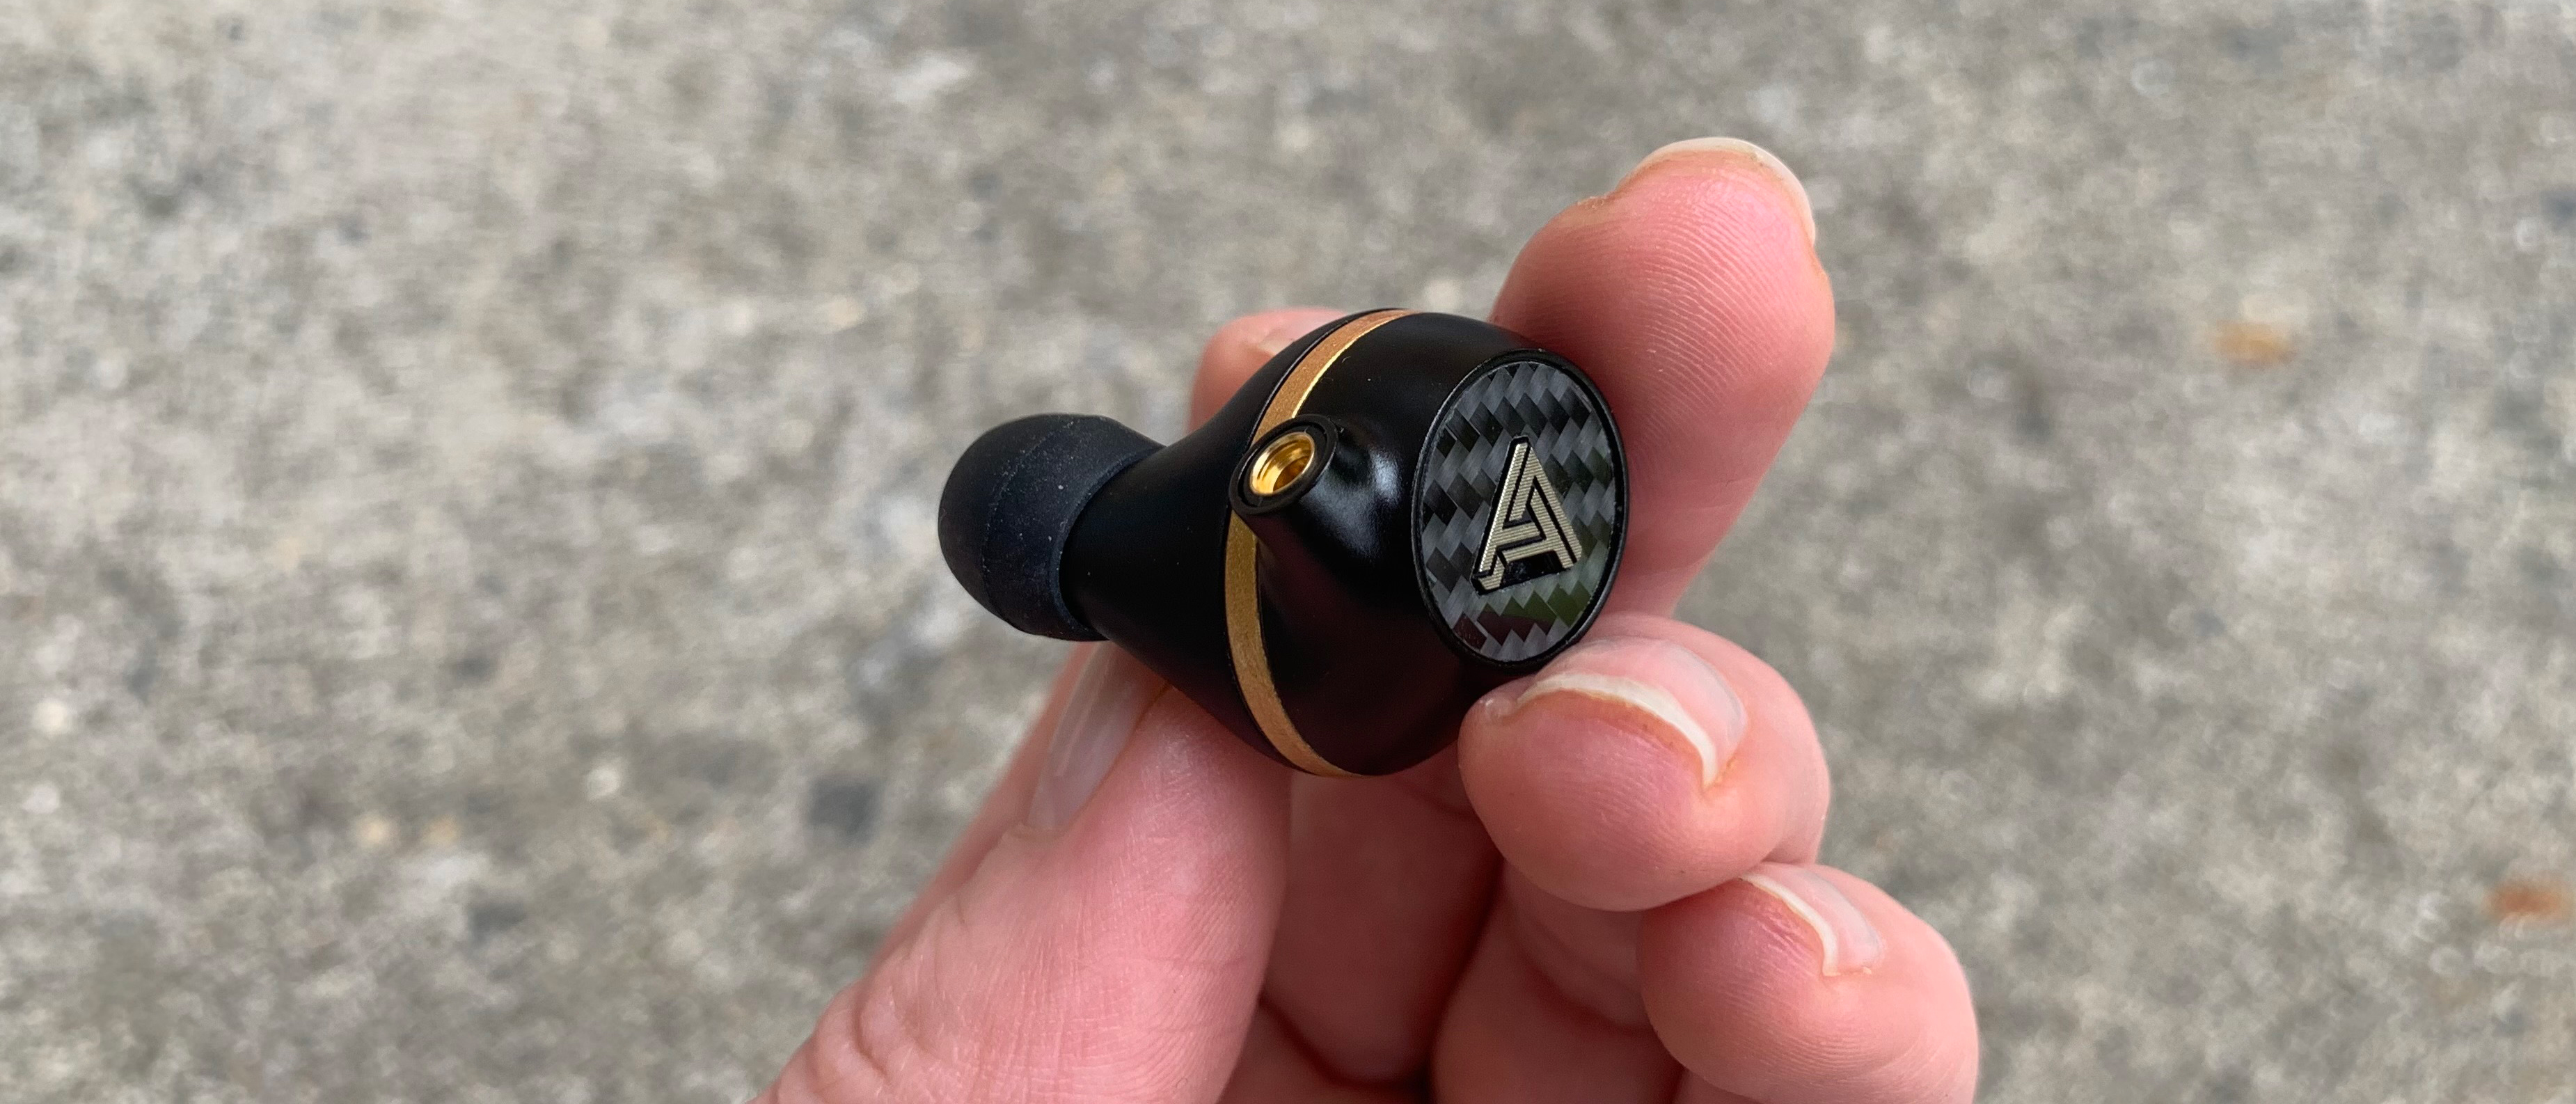 Audeze Euclid review: some of the most insightful earbuds you can